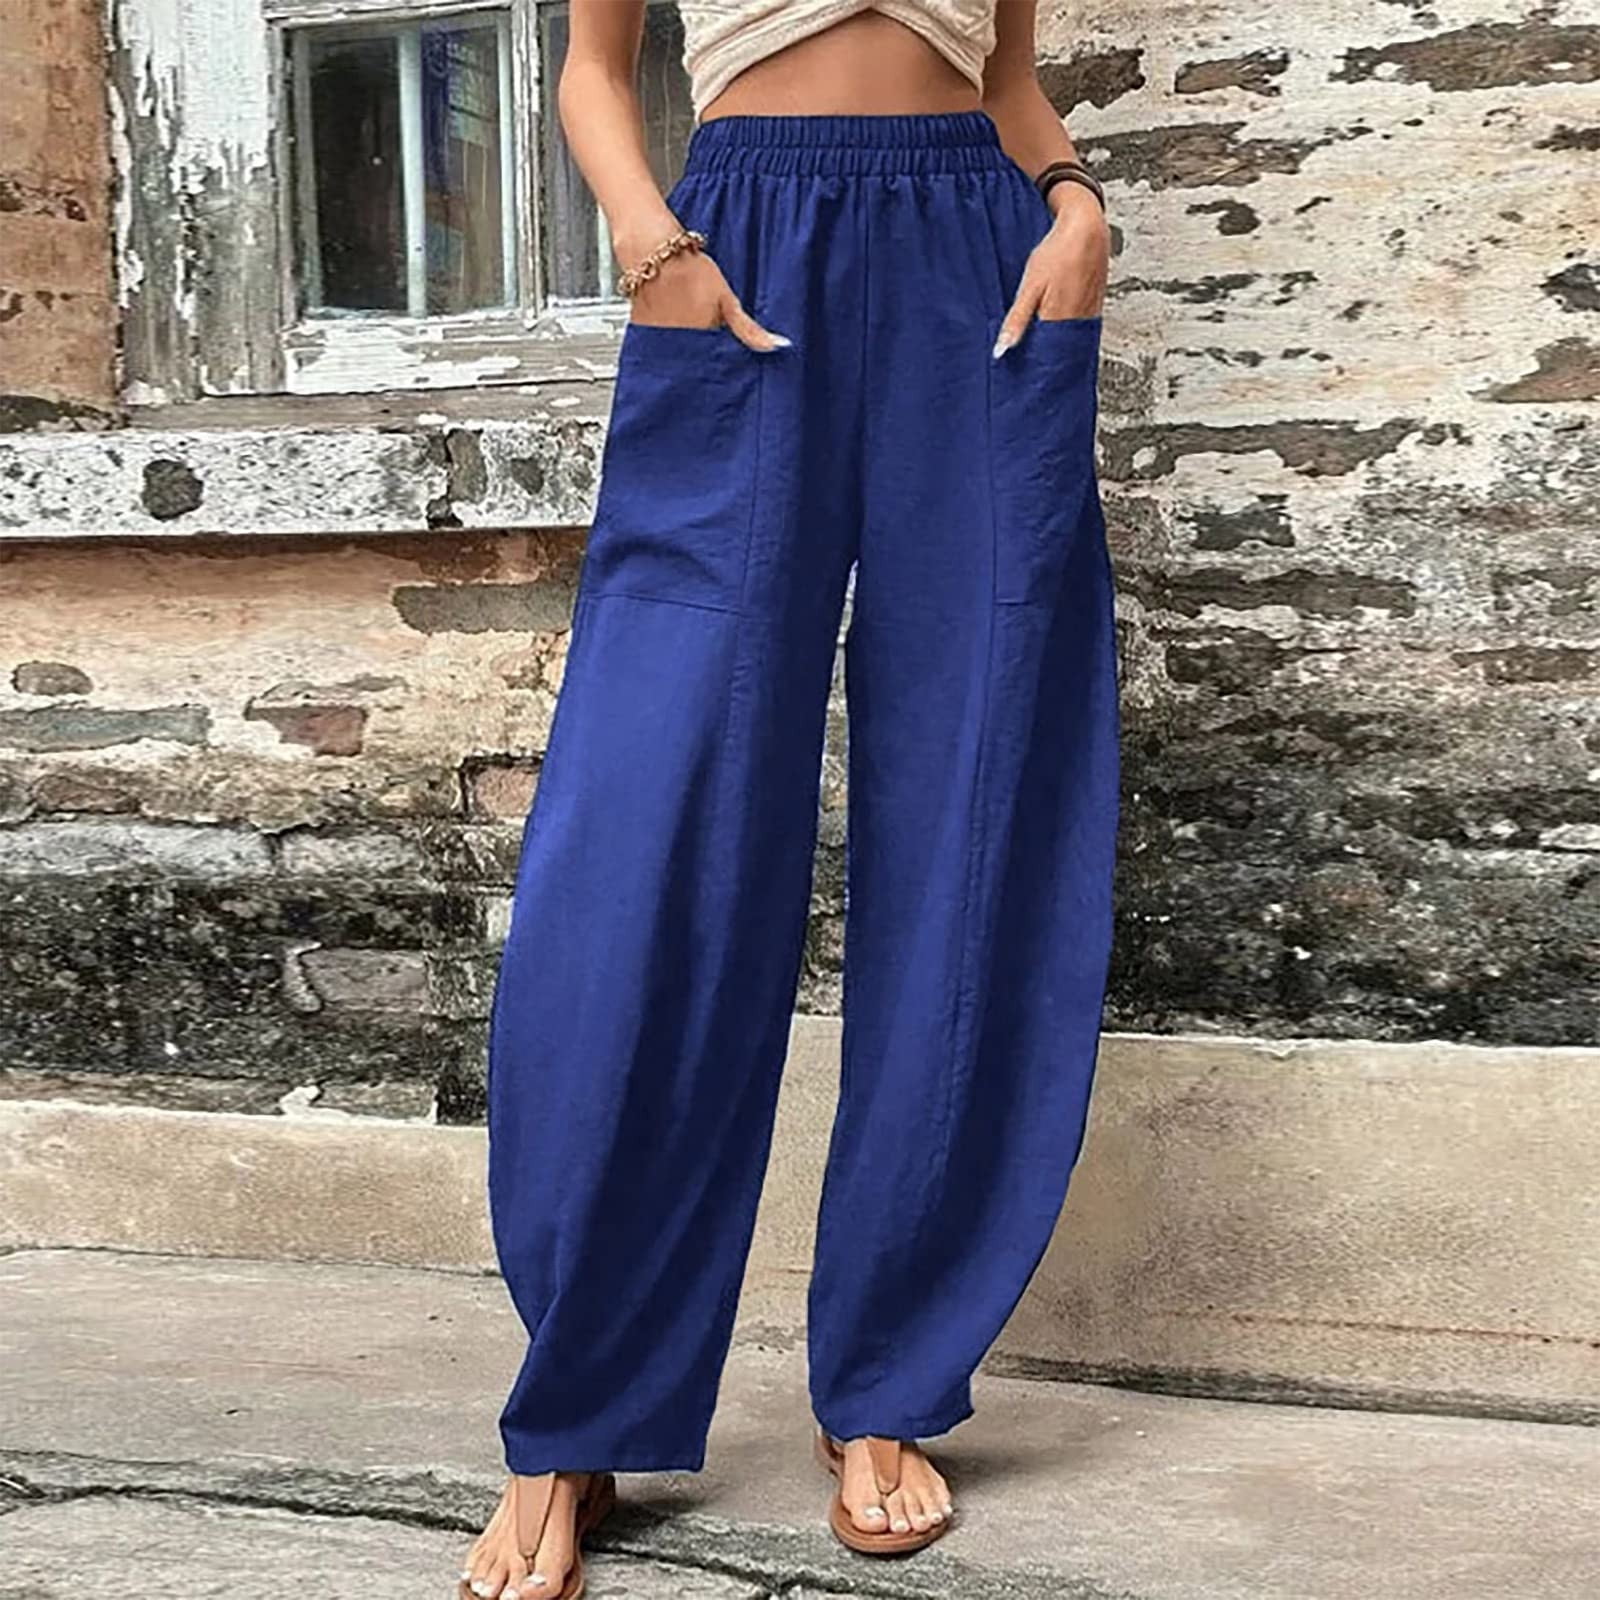 Xysaqa Cute Summer Outfits for Women, Women's Casual Loose Baggy Pants  Trousers Overalls Cotton Linen Long Pants with Pockets 